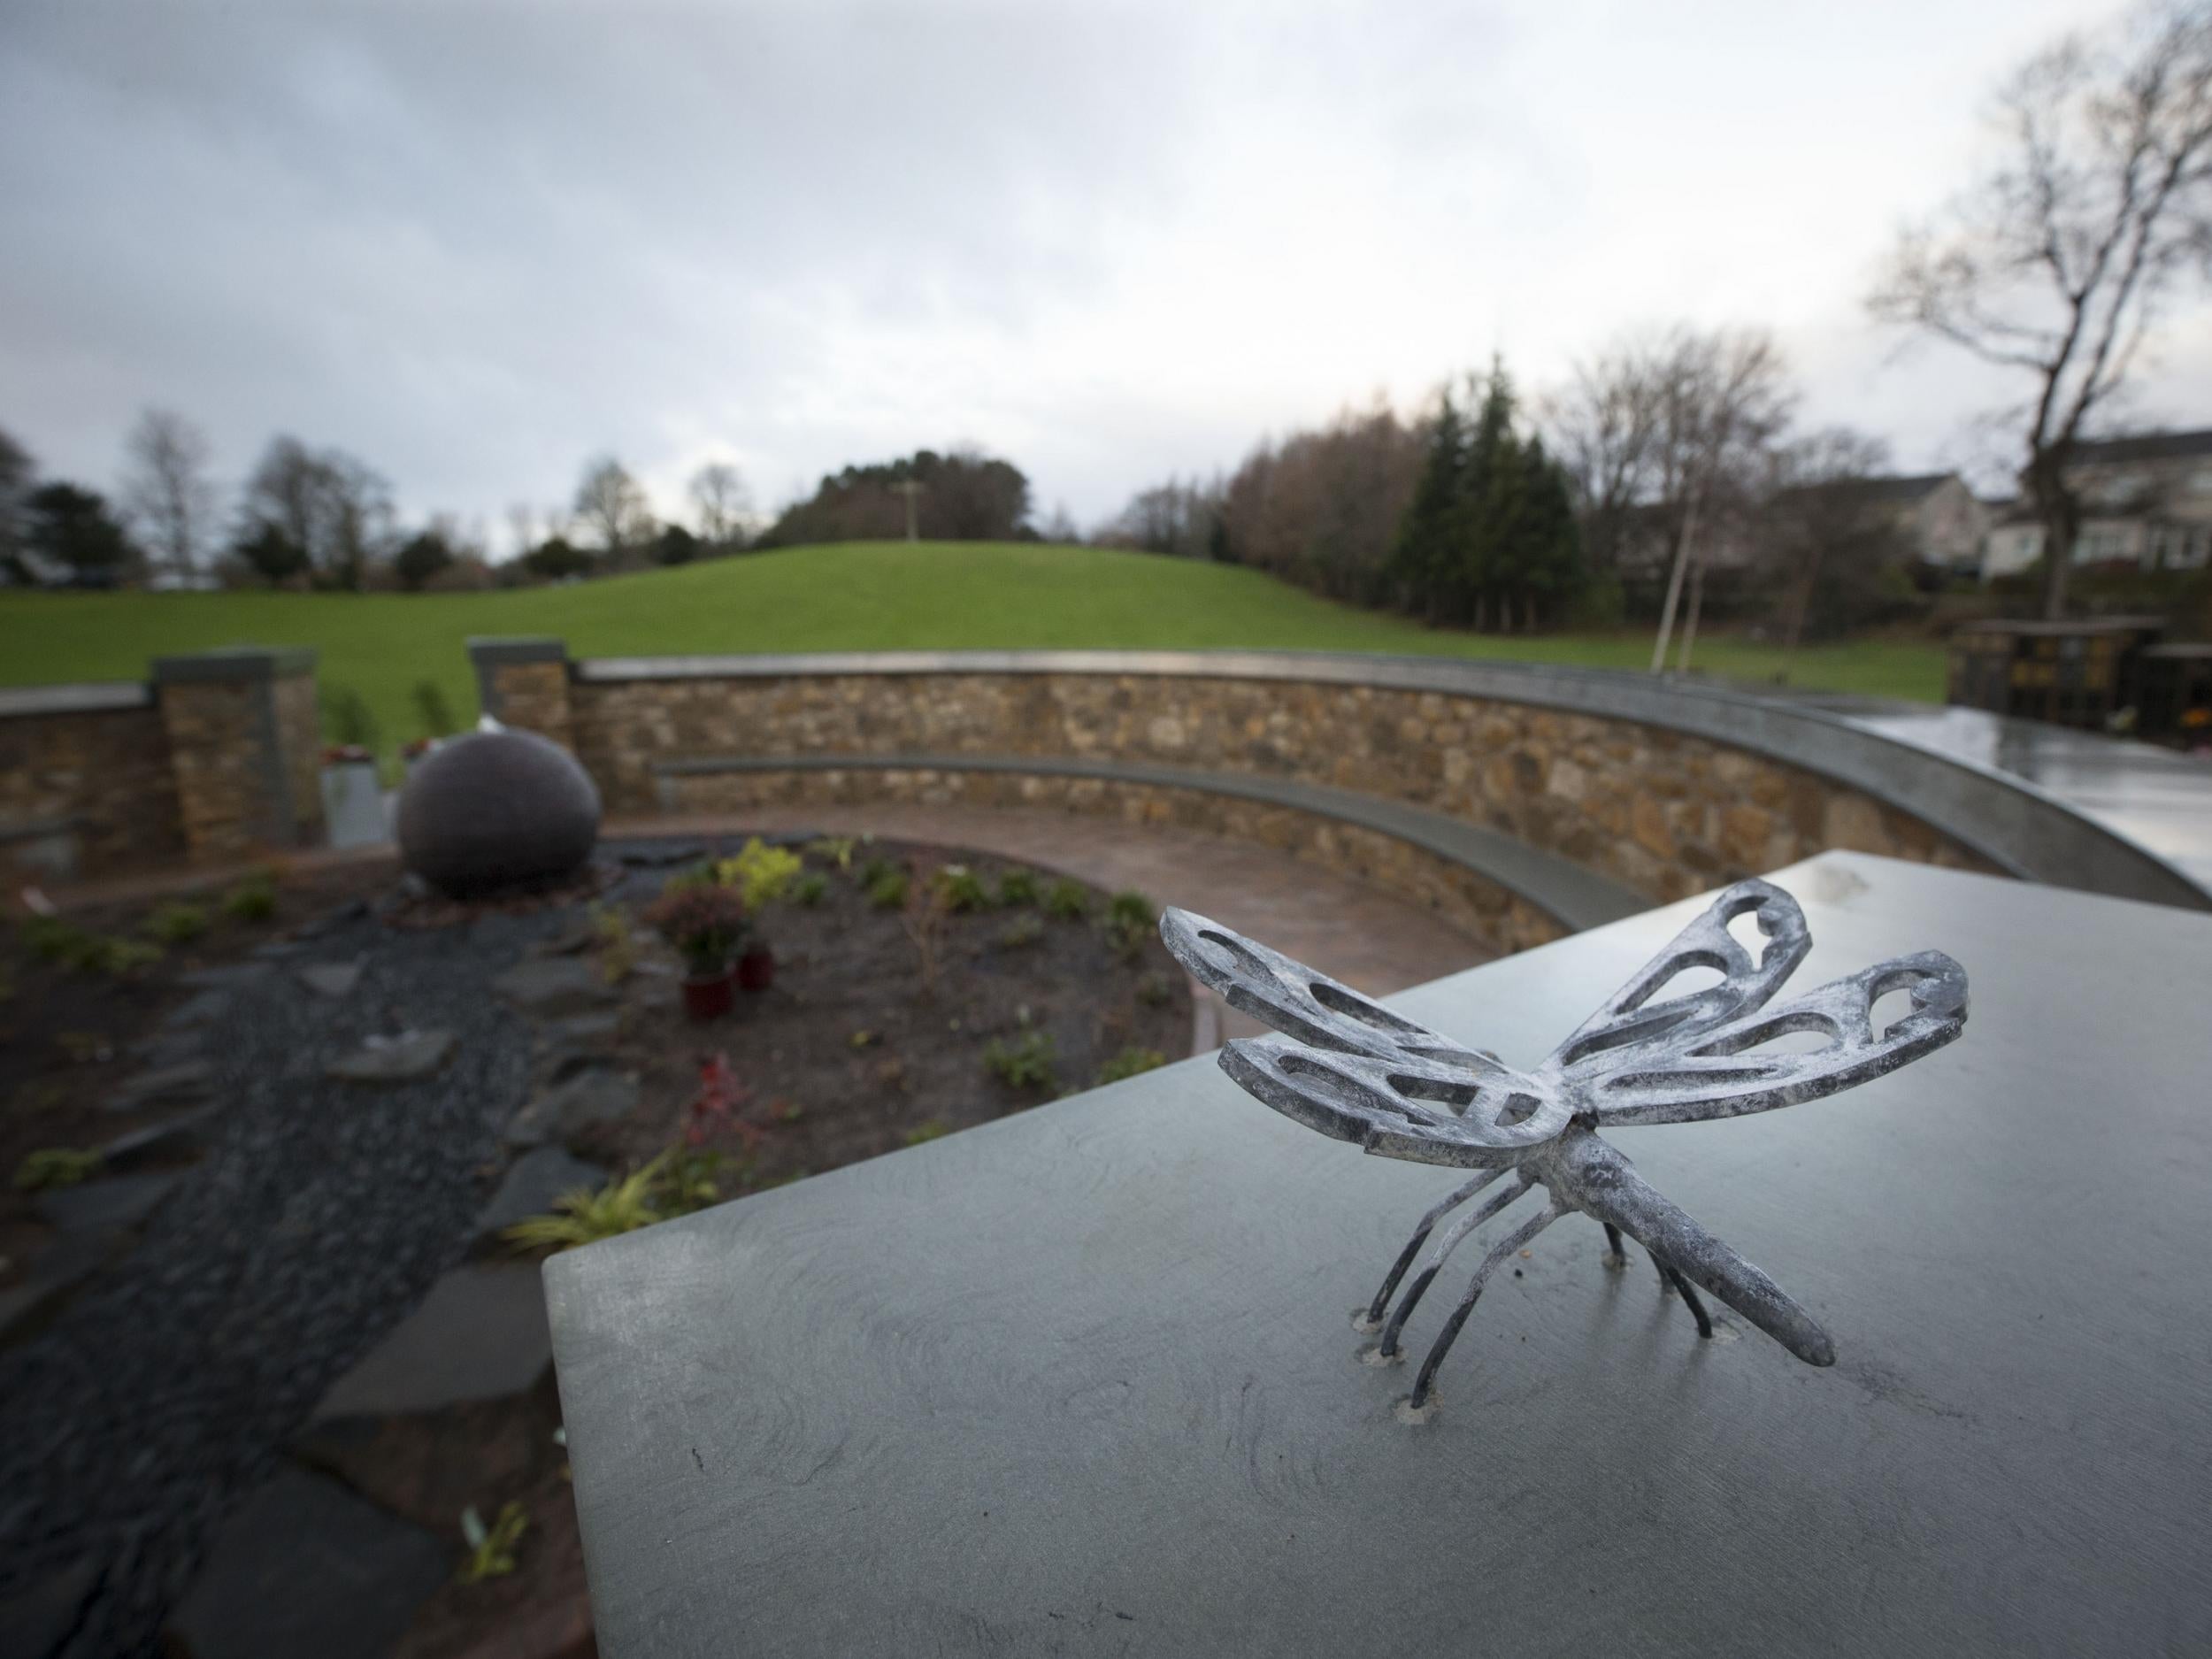 A memorial garden for 149 babies involved in the baby ash scandal in Edinburgh